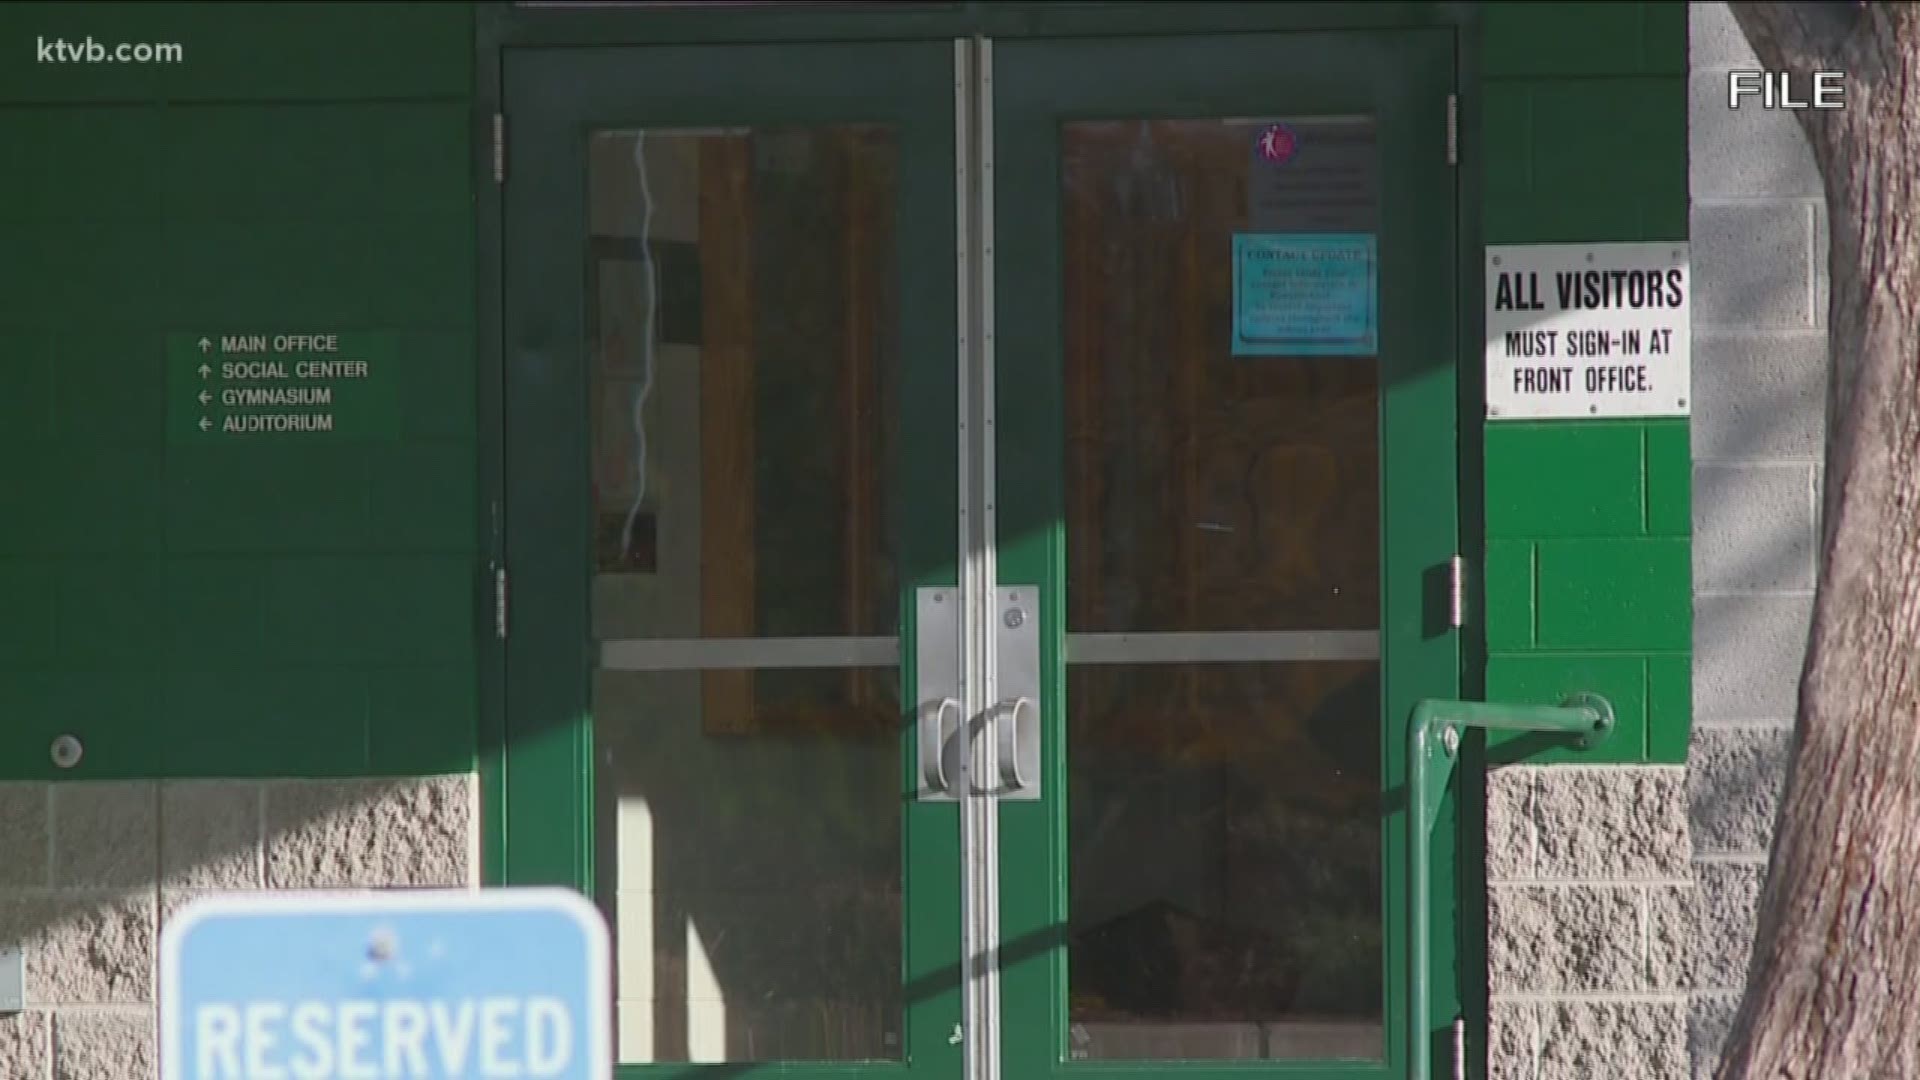 So far there are no cases of the virus in Idaho, but that's not stopping schools and the Idaho Department of Health and Welfare from making preparations.